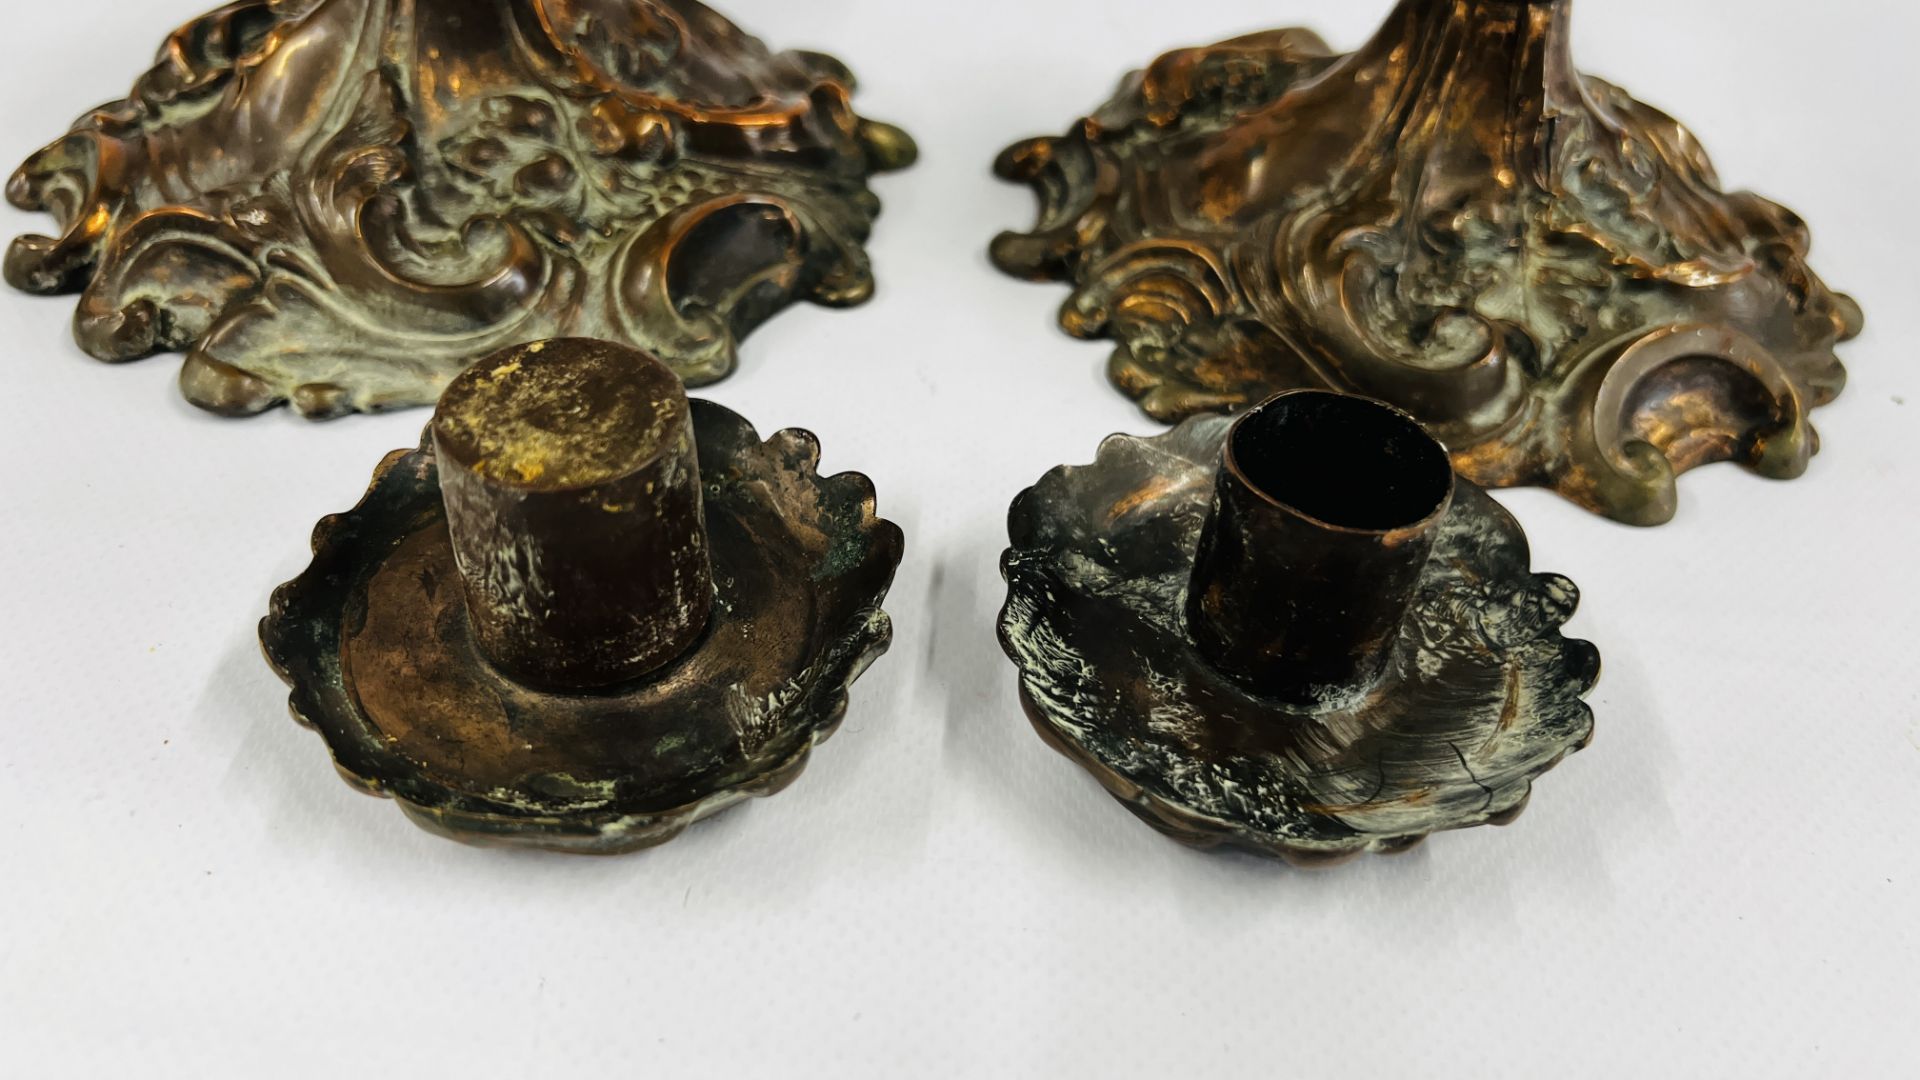 A PAIR OF ORNATE C19TH COPPER CANDLESTICKS WITH DETACHABLE SCONCES - HEIGHT 27CM. - Image 18 of 20